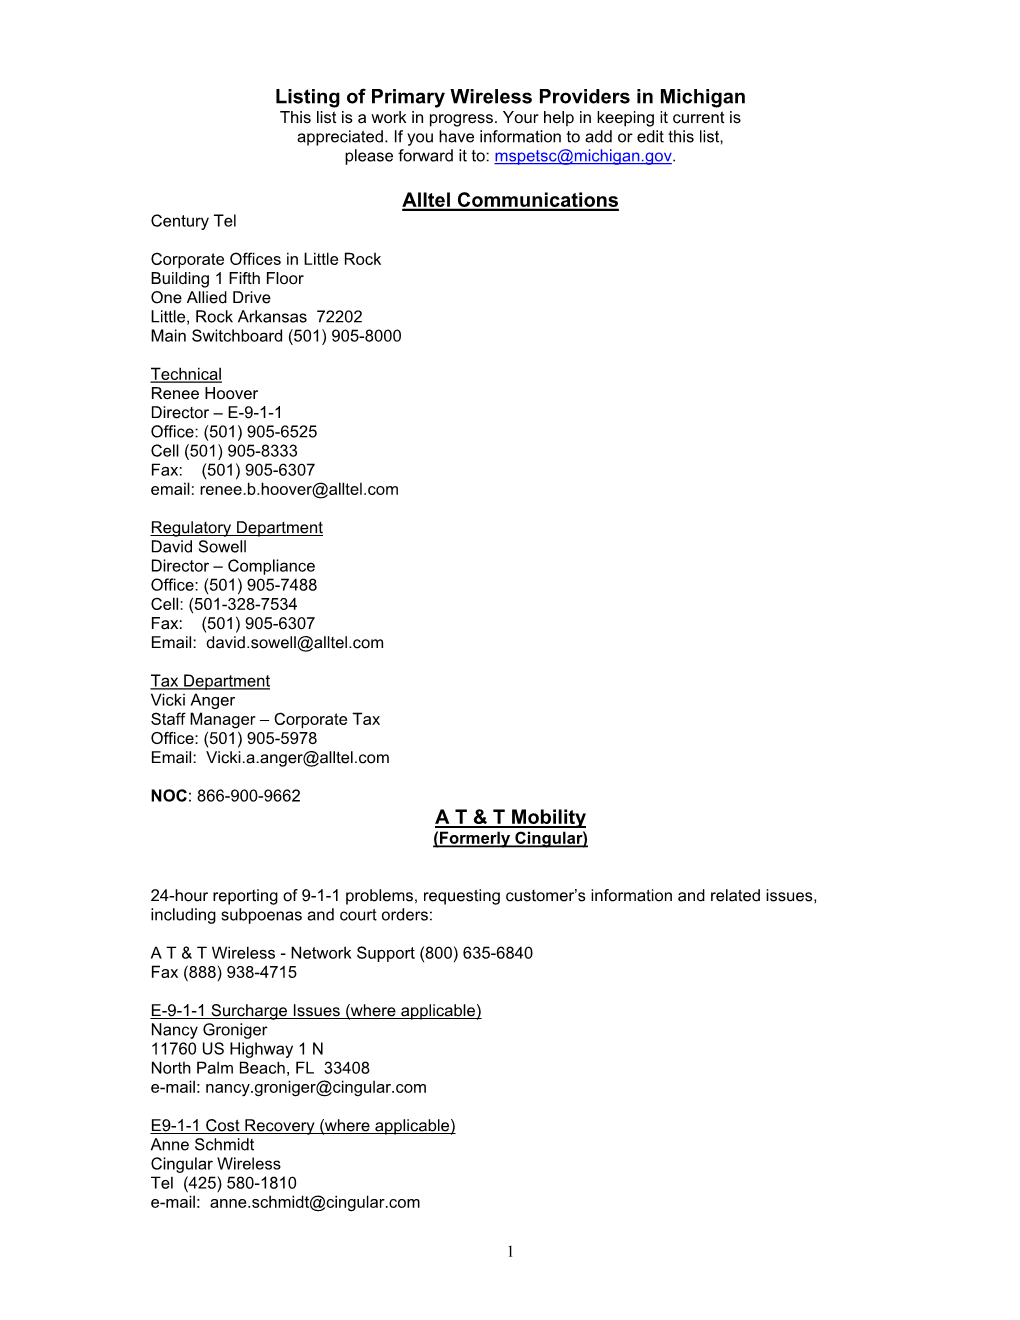 Listing of Primary Wireless Providers in Michigan Alltel Communications